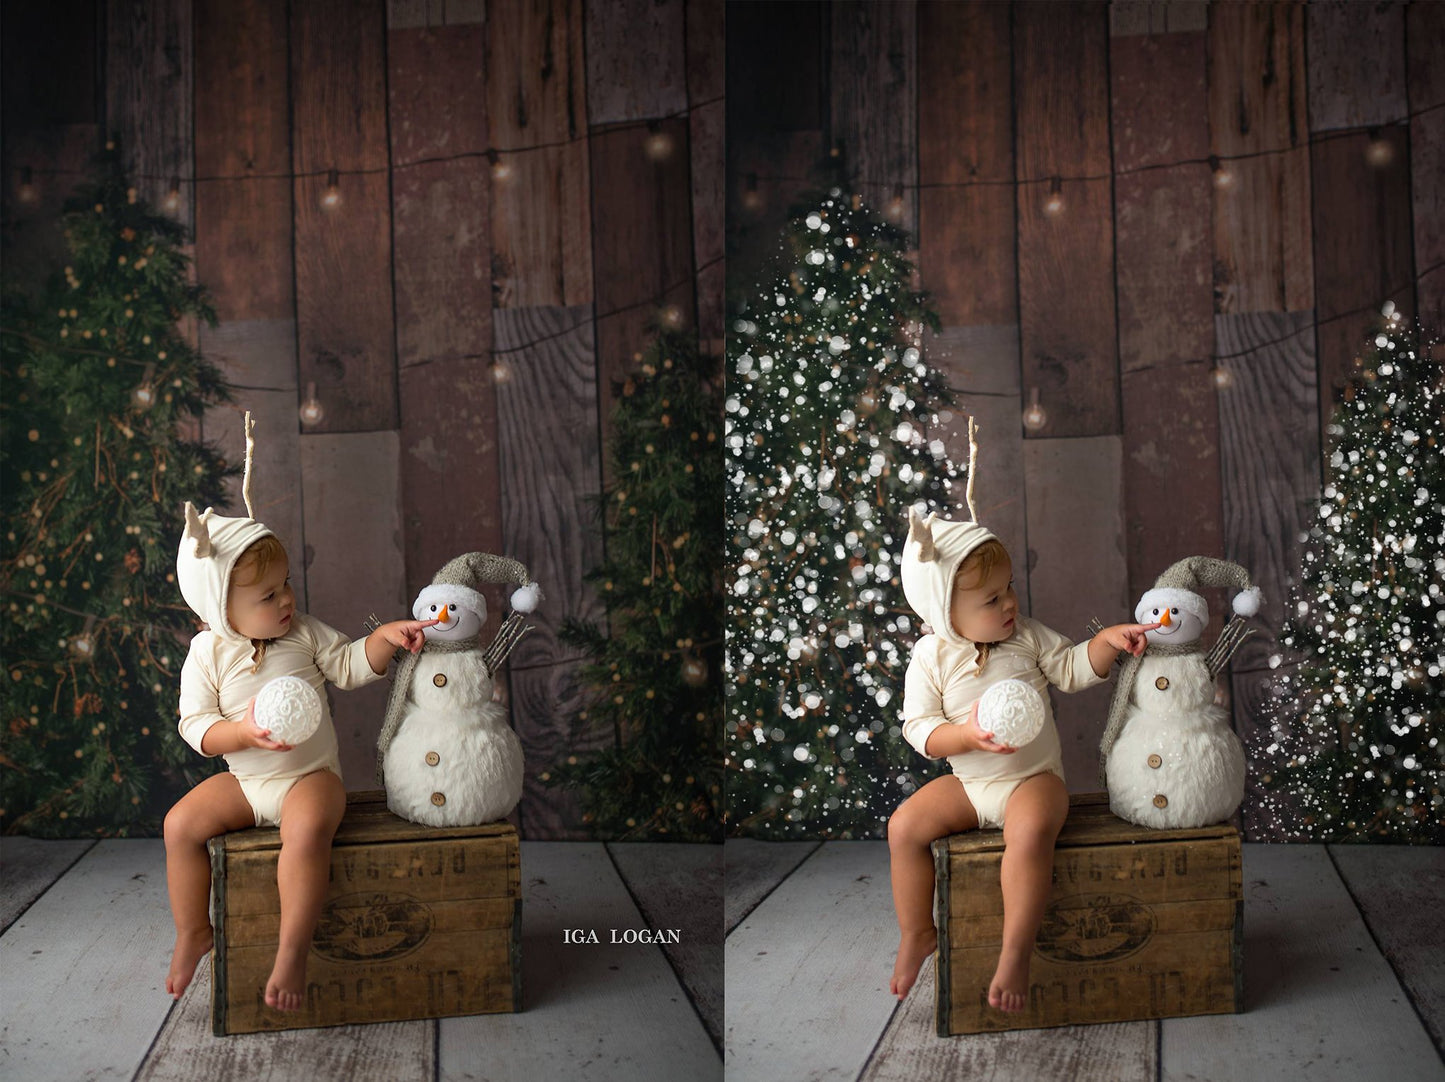 Christmas Tree Snow Overlays - Photoshop Overlays, Digital Backgrounds and Lightroom Presets